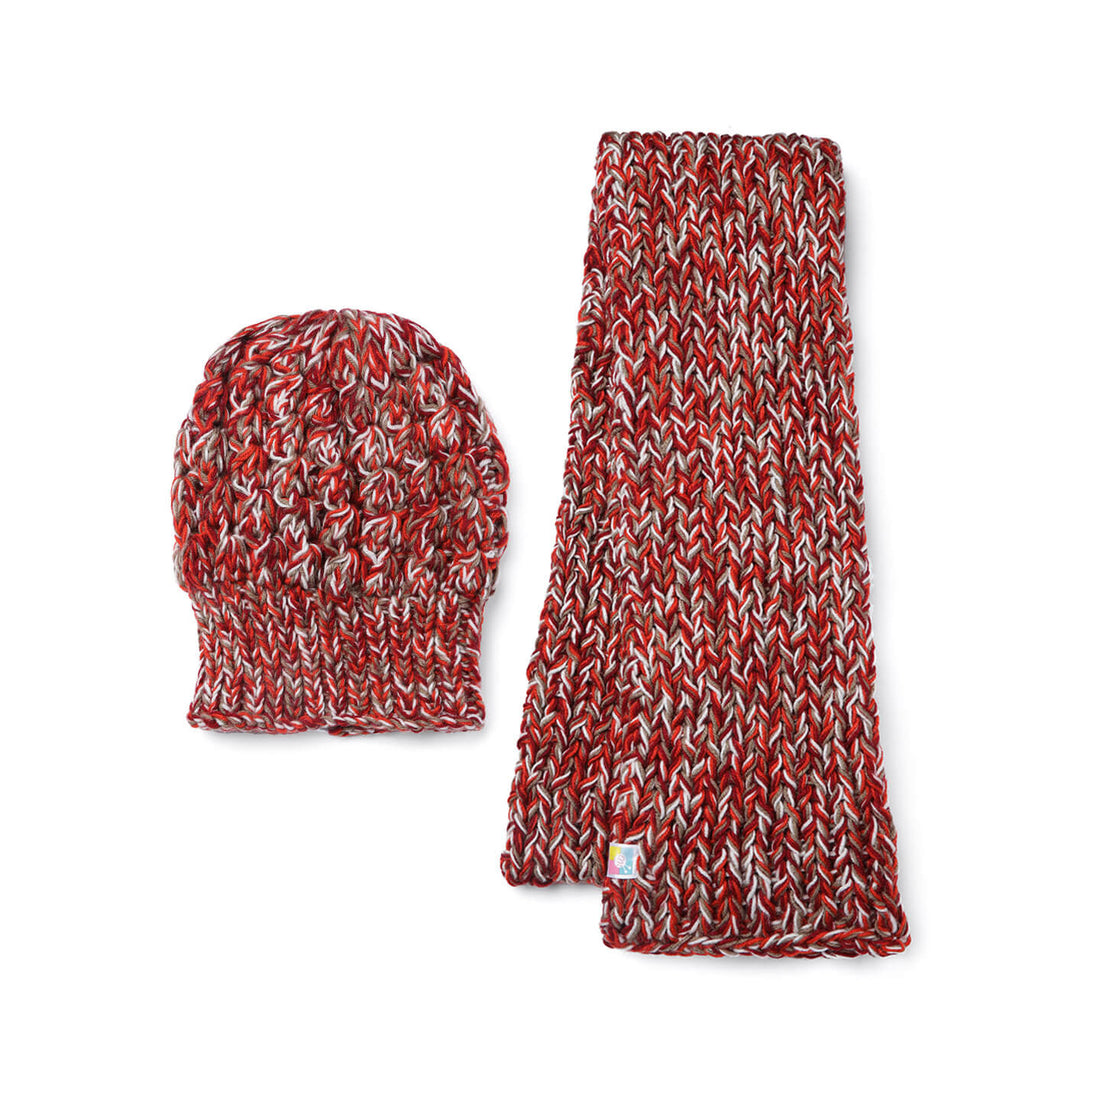 Beanie and Scarf Coordinating Set - 3174